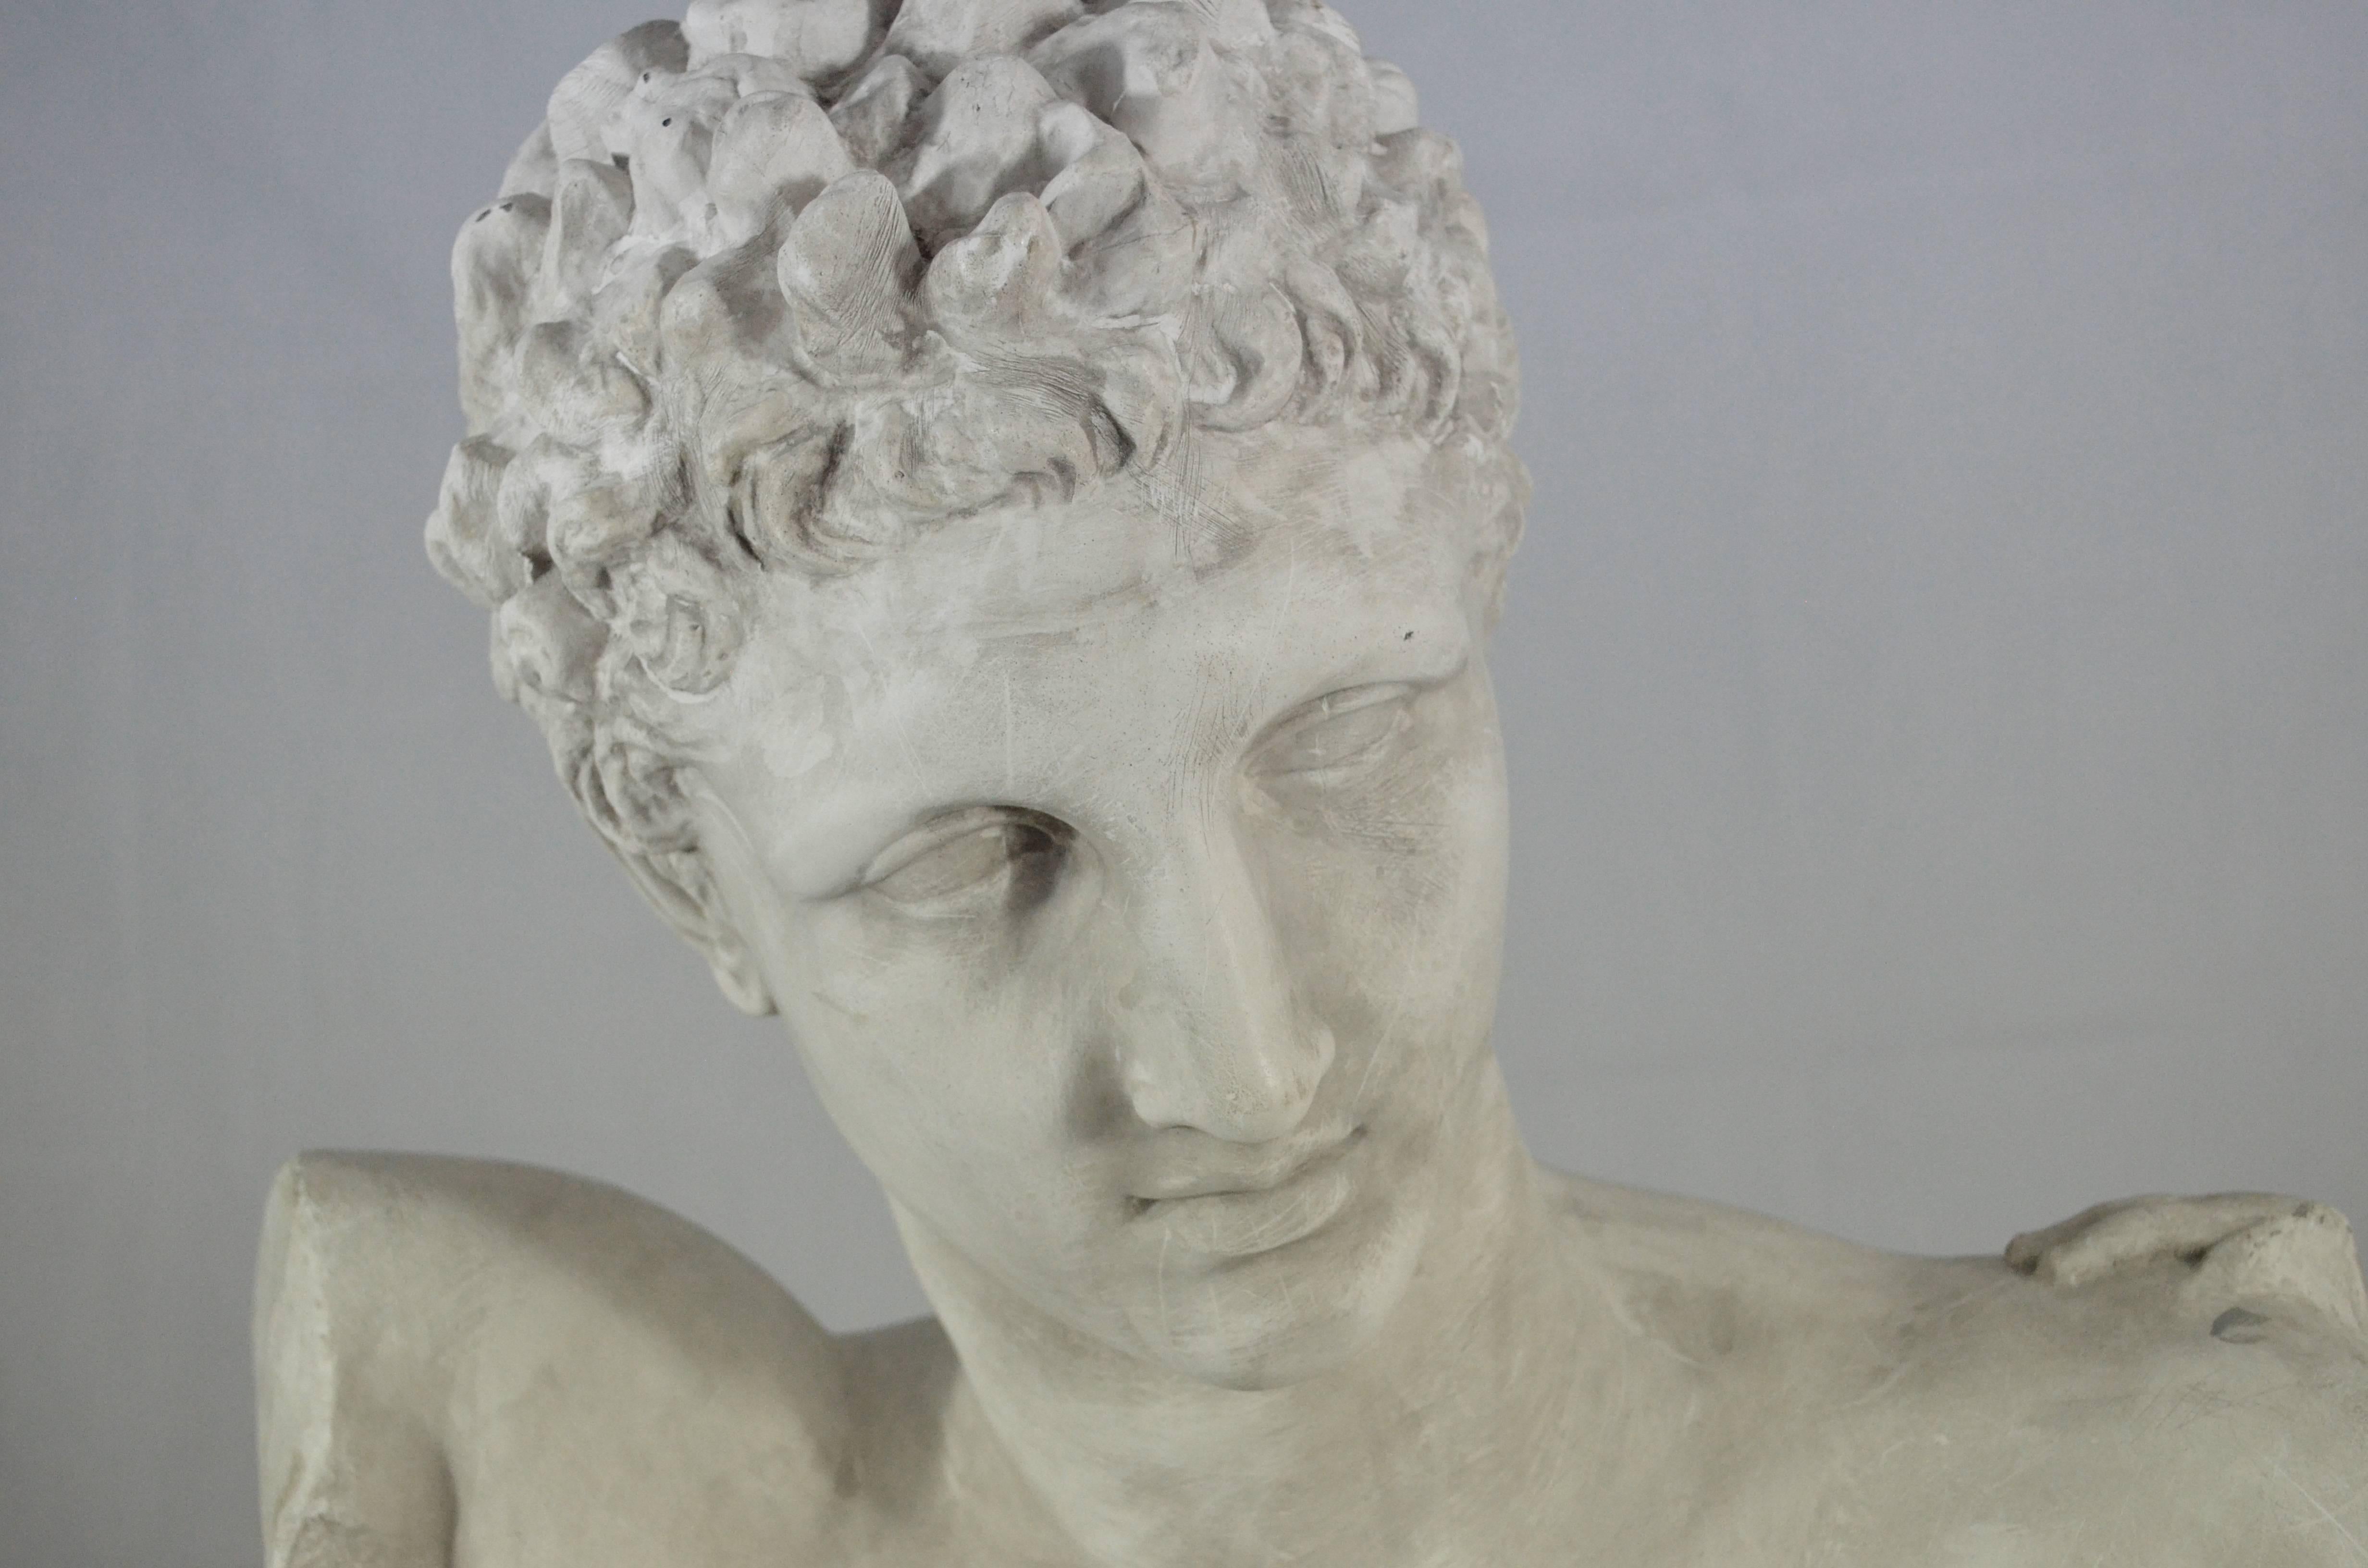 An academic bust representing Hermes from Parassitele, realized in  Italy, early 20th century. The original bust, how is stated in the tag on hte back is from the 340 B.C. and it is located in the Olimpia Museum (Greece).  The object is in perfect